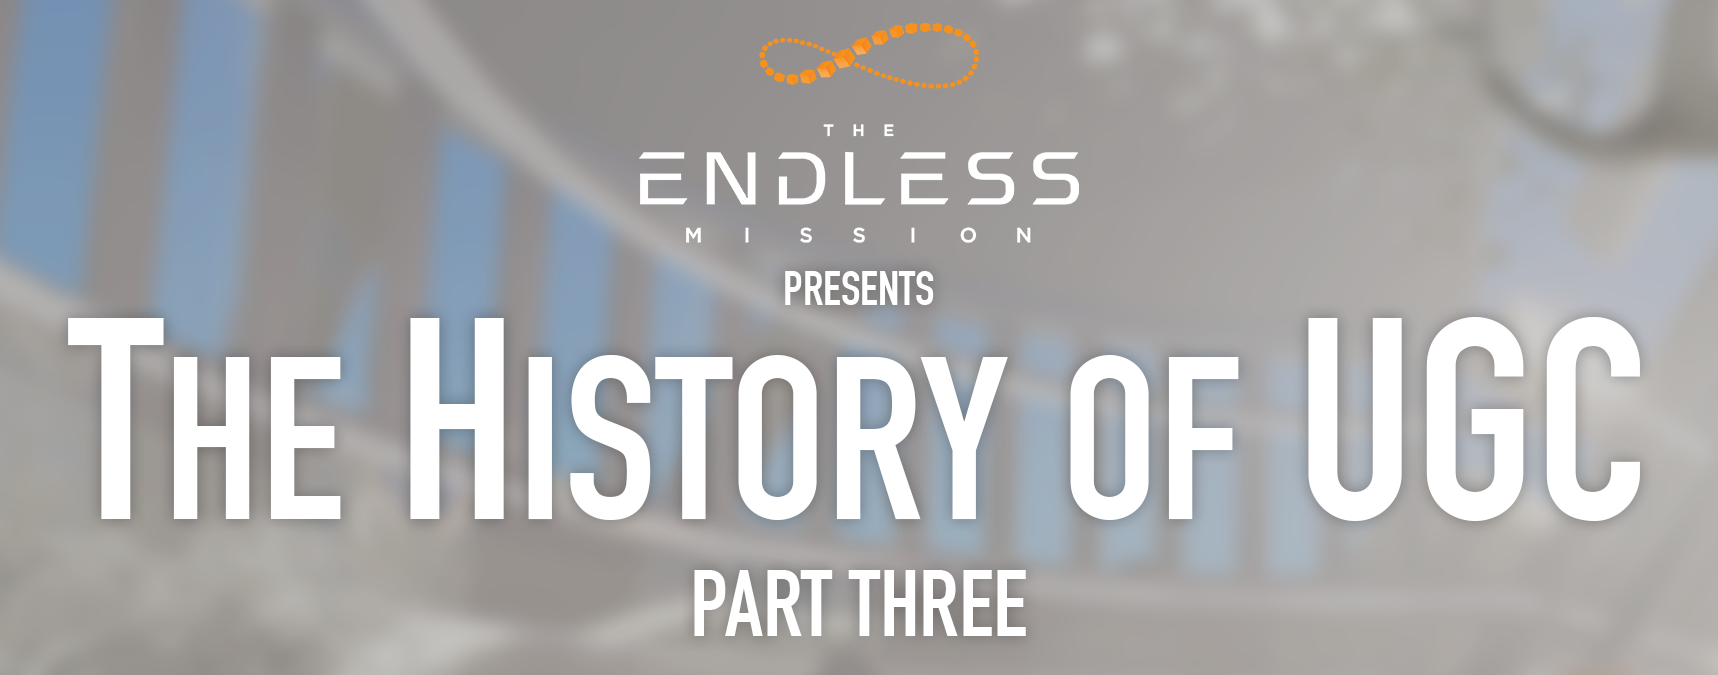 The Endless Mission The Endless Mission And The History Of Ugc Part 3 Steam News - people have made really cool items on roblox based on tf2 things i ll show a few here s the first one roblox